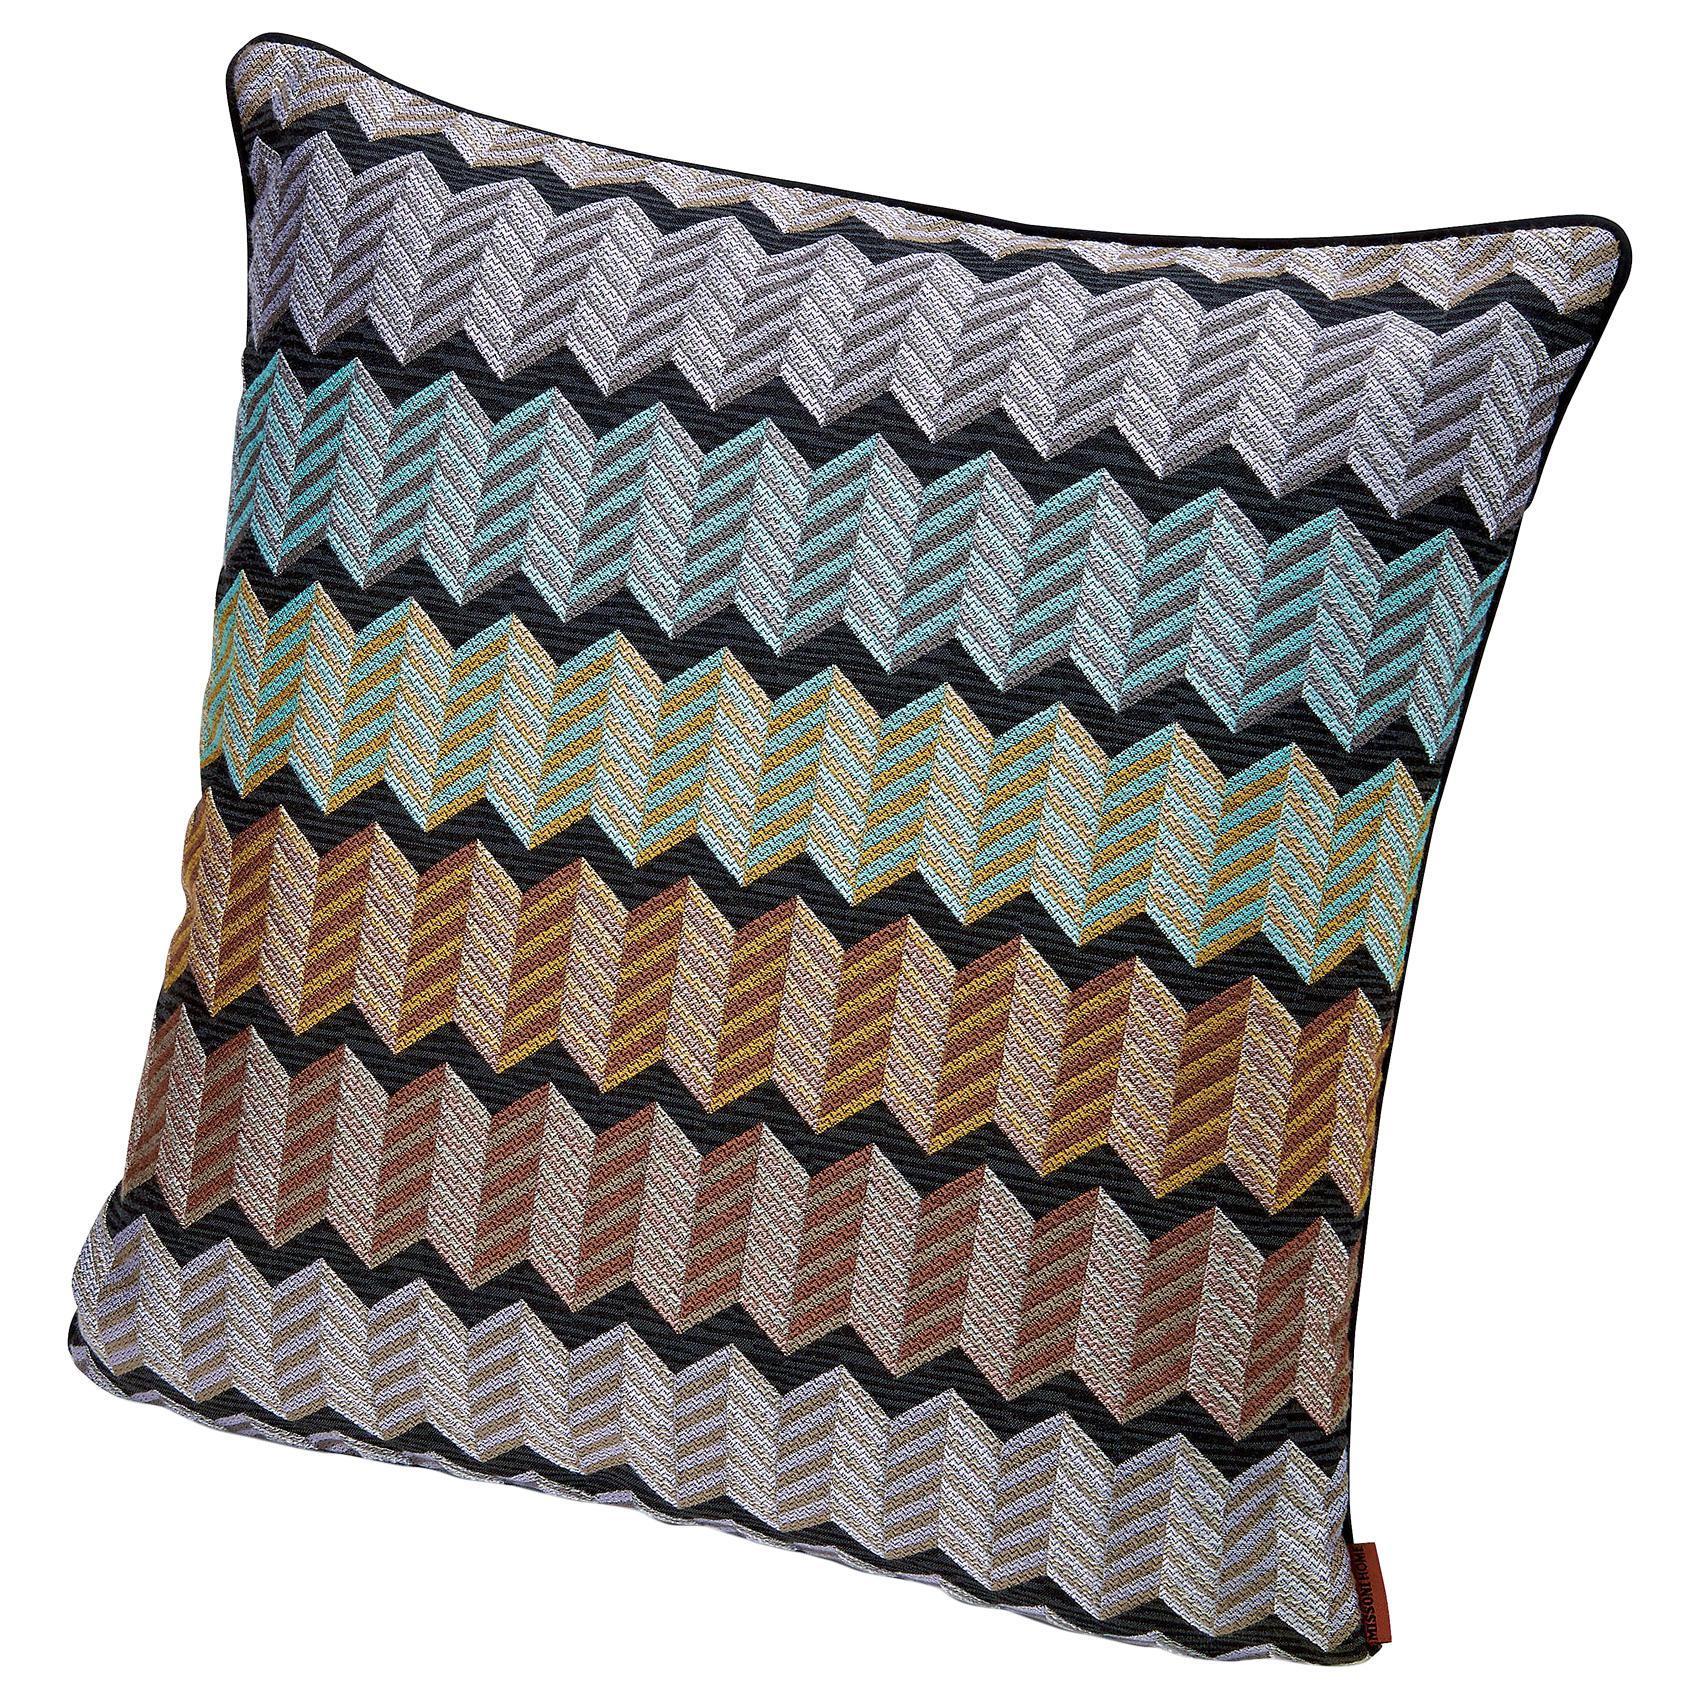 Missoni Home Waterford Jewel-Tone Chevron Cushion with Stripes For Sale